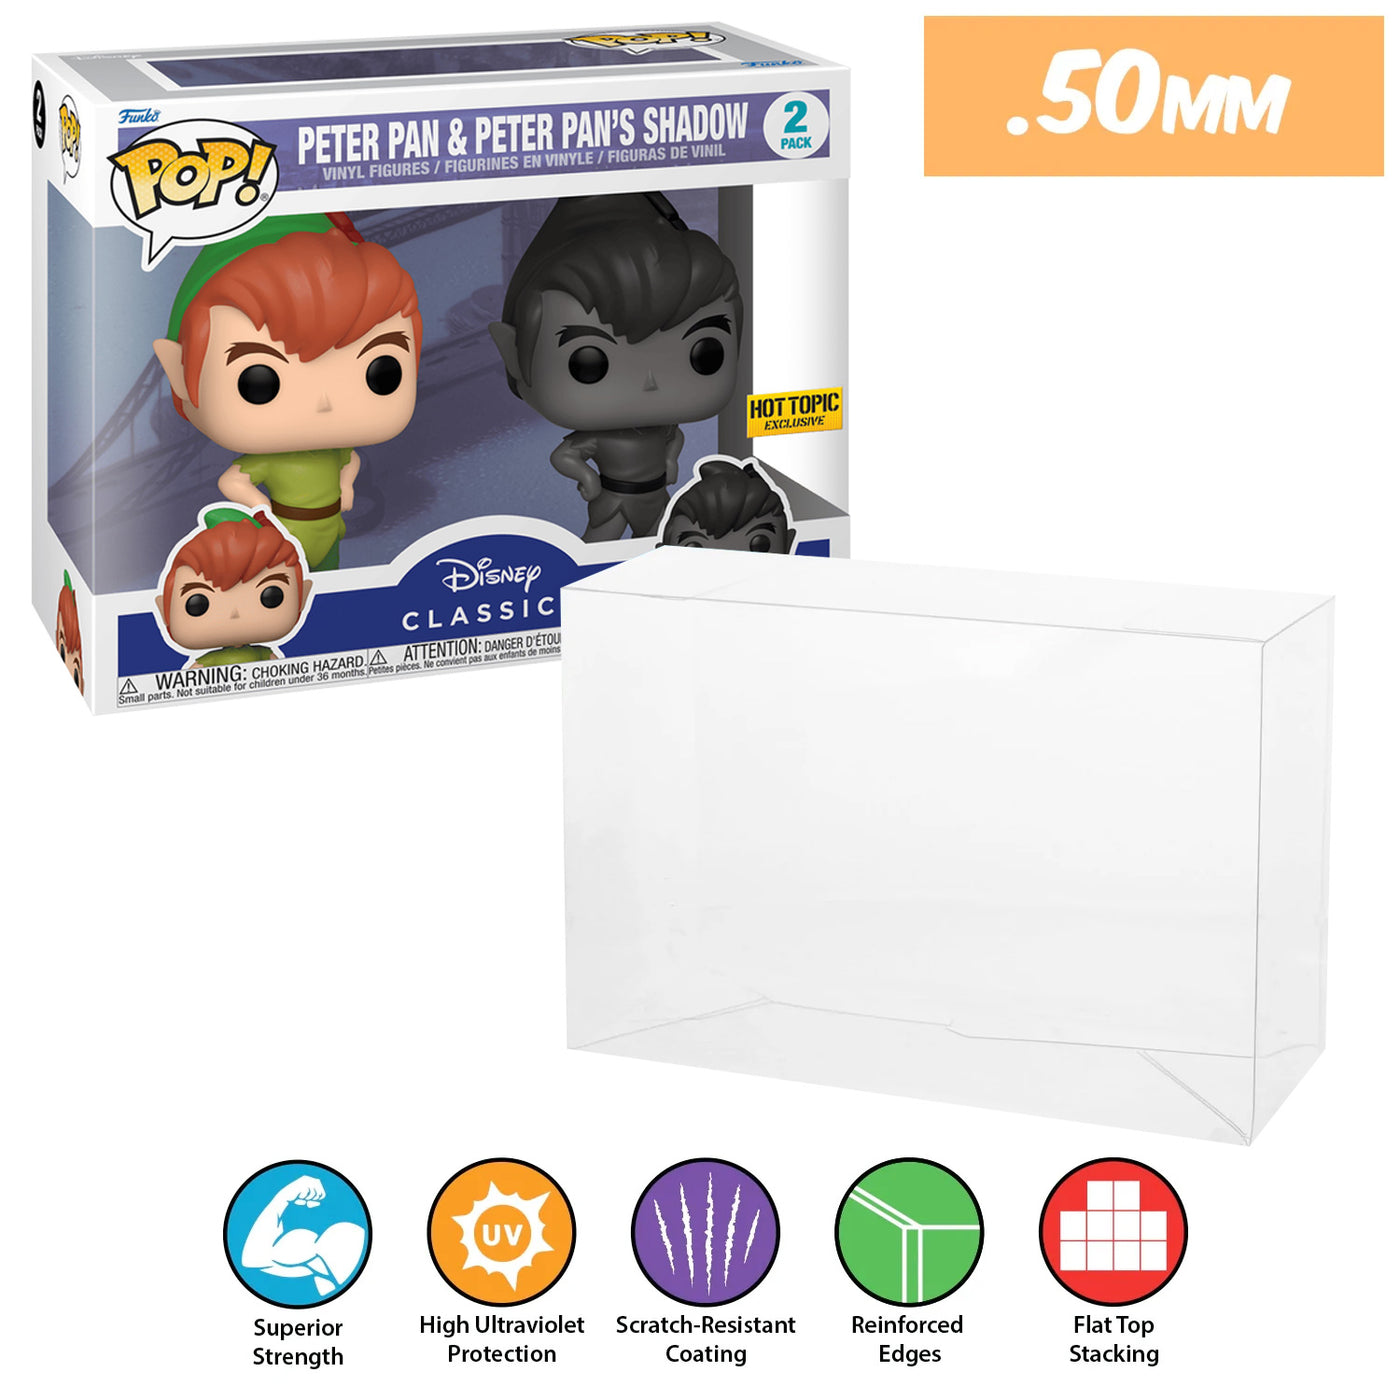 peter pan and peter pans shadow 2 pack best funko pop protectors thick strong uv scratch flat top stack vinyl display geek plastic shield vaulted eco armor fits collect protect display case kollector protector